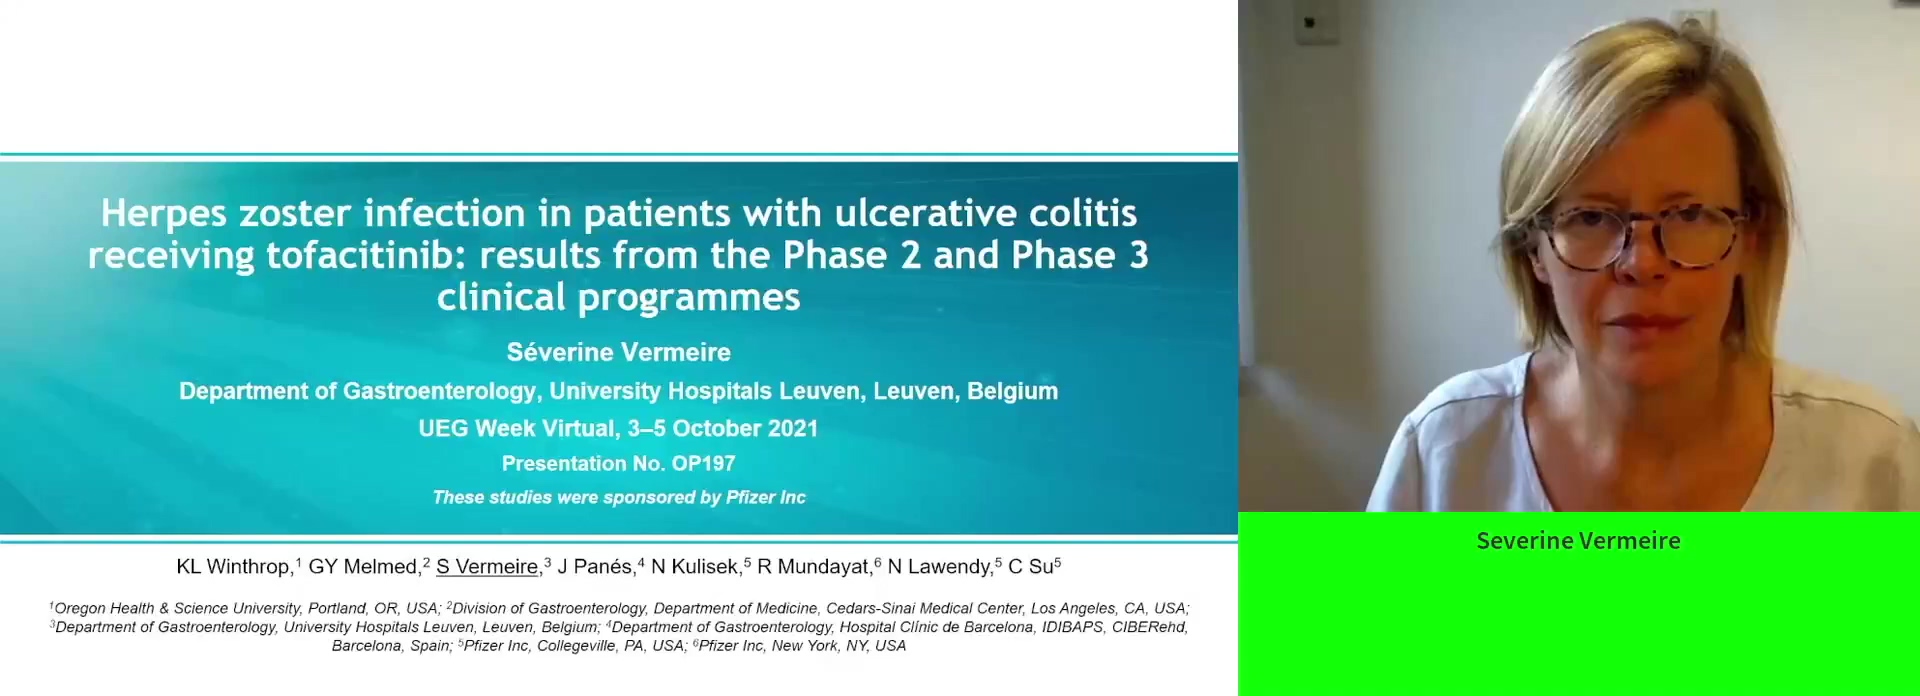 HERPES ZOSTER INFECTION IN PATIENTS WITH ULCERATIVE COLITIS RECEIVING TOFACITINIB: RESULTS FROM THE PHASE 2 AND PHASE 3 CLINICAL PROGRAMMES